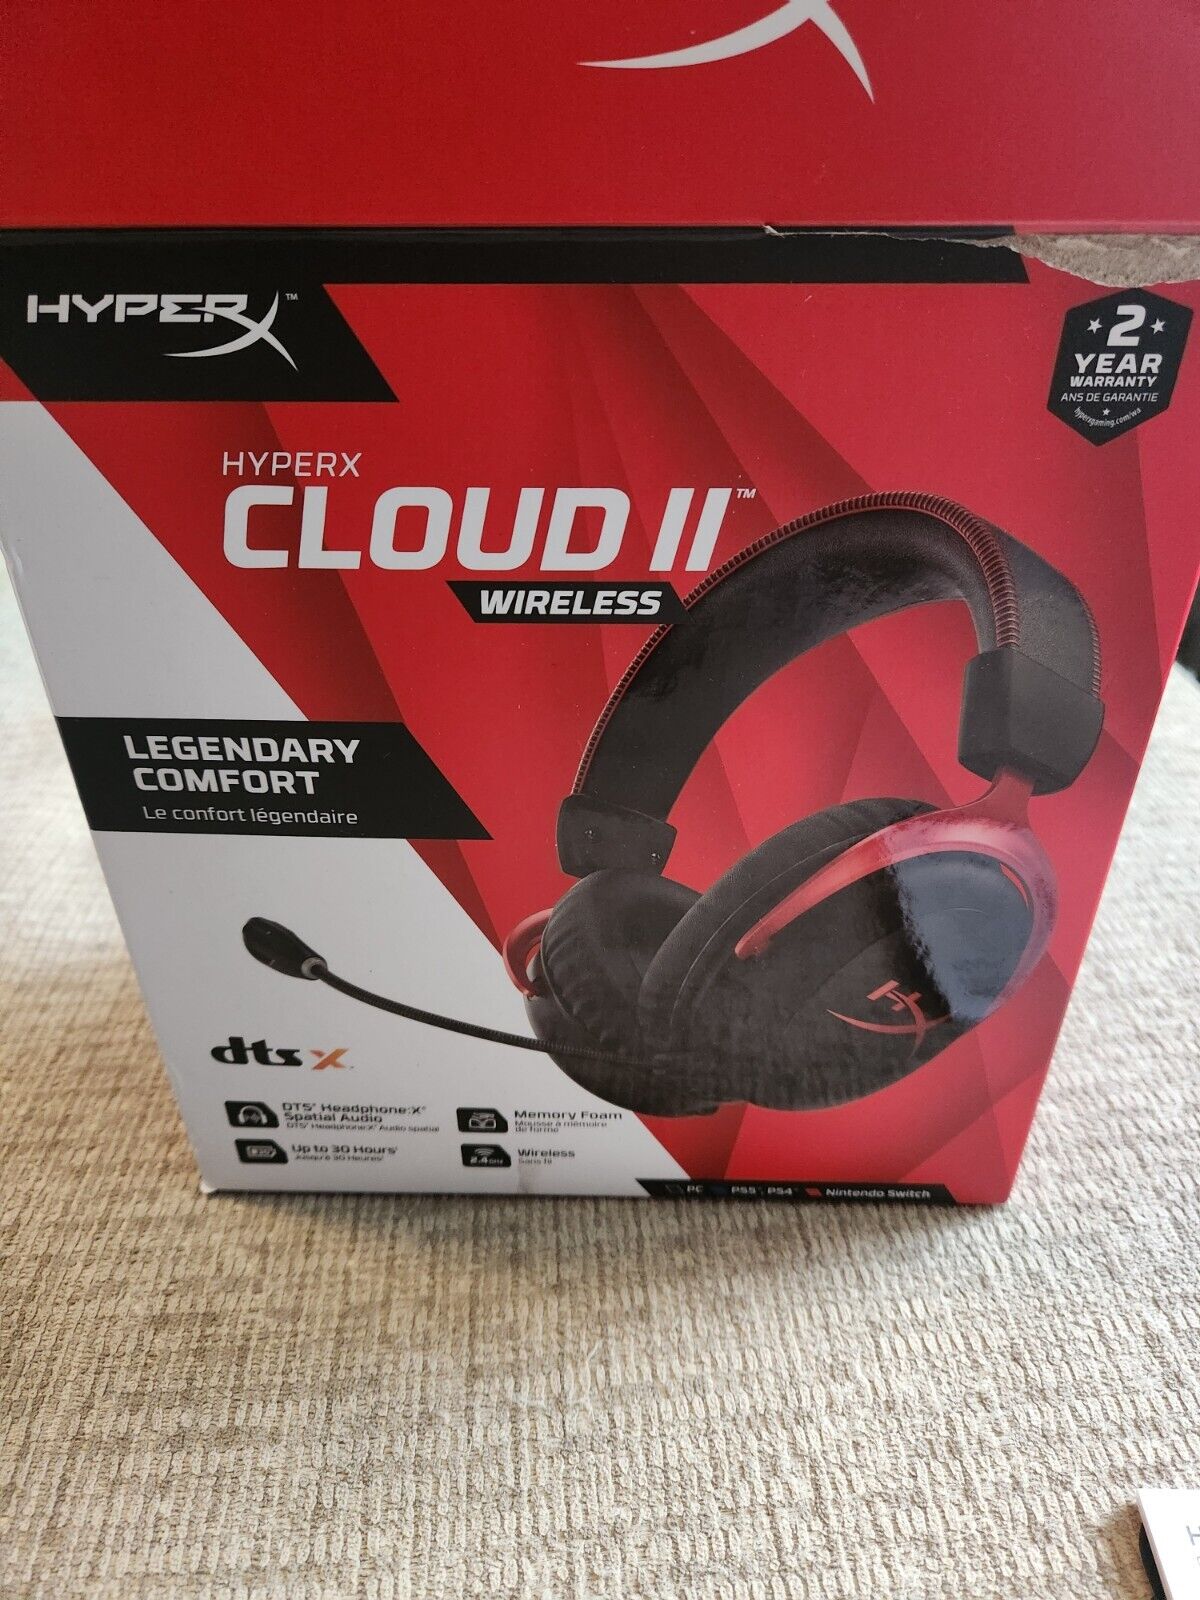 Wireless Gaming Headset - HyperX Cloud II Wireless NO DONGLE OR CORD